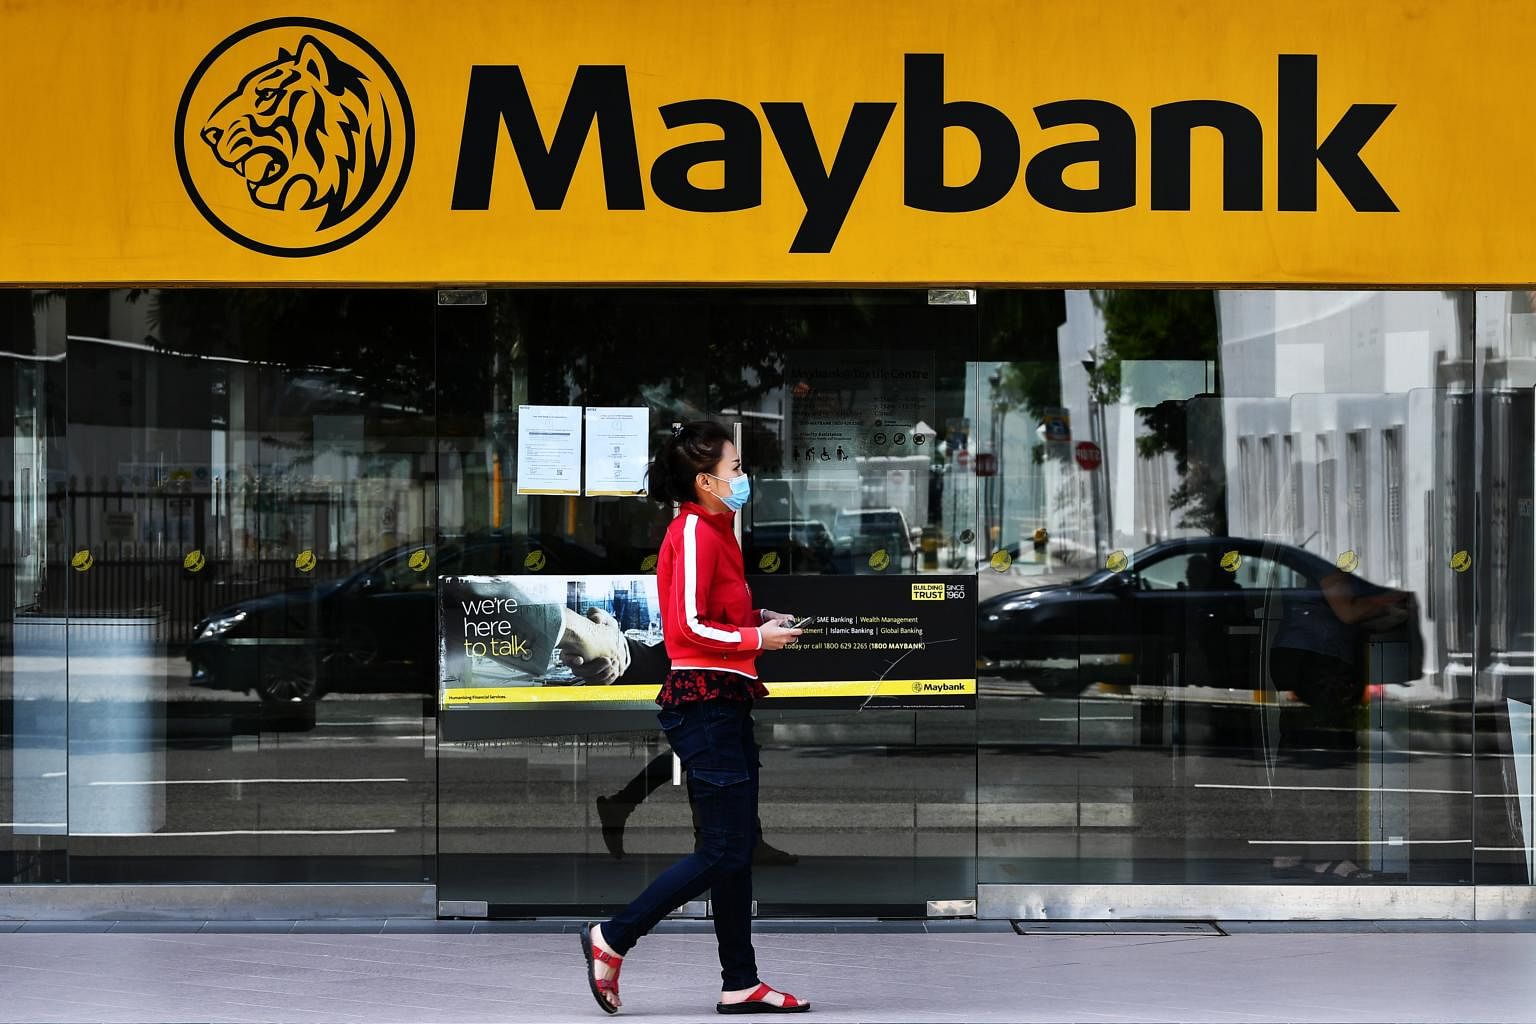 Malaysia S Biggest Bank Warns Of Fake Maybank Website Used By Scammers Se Asia News Top Stories The Straits Times